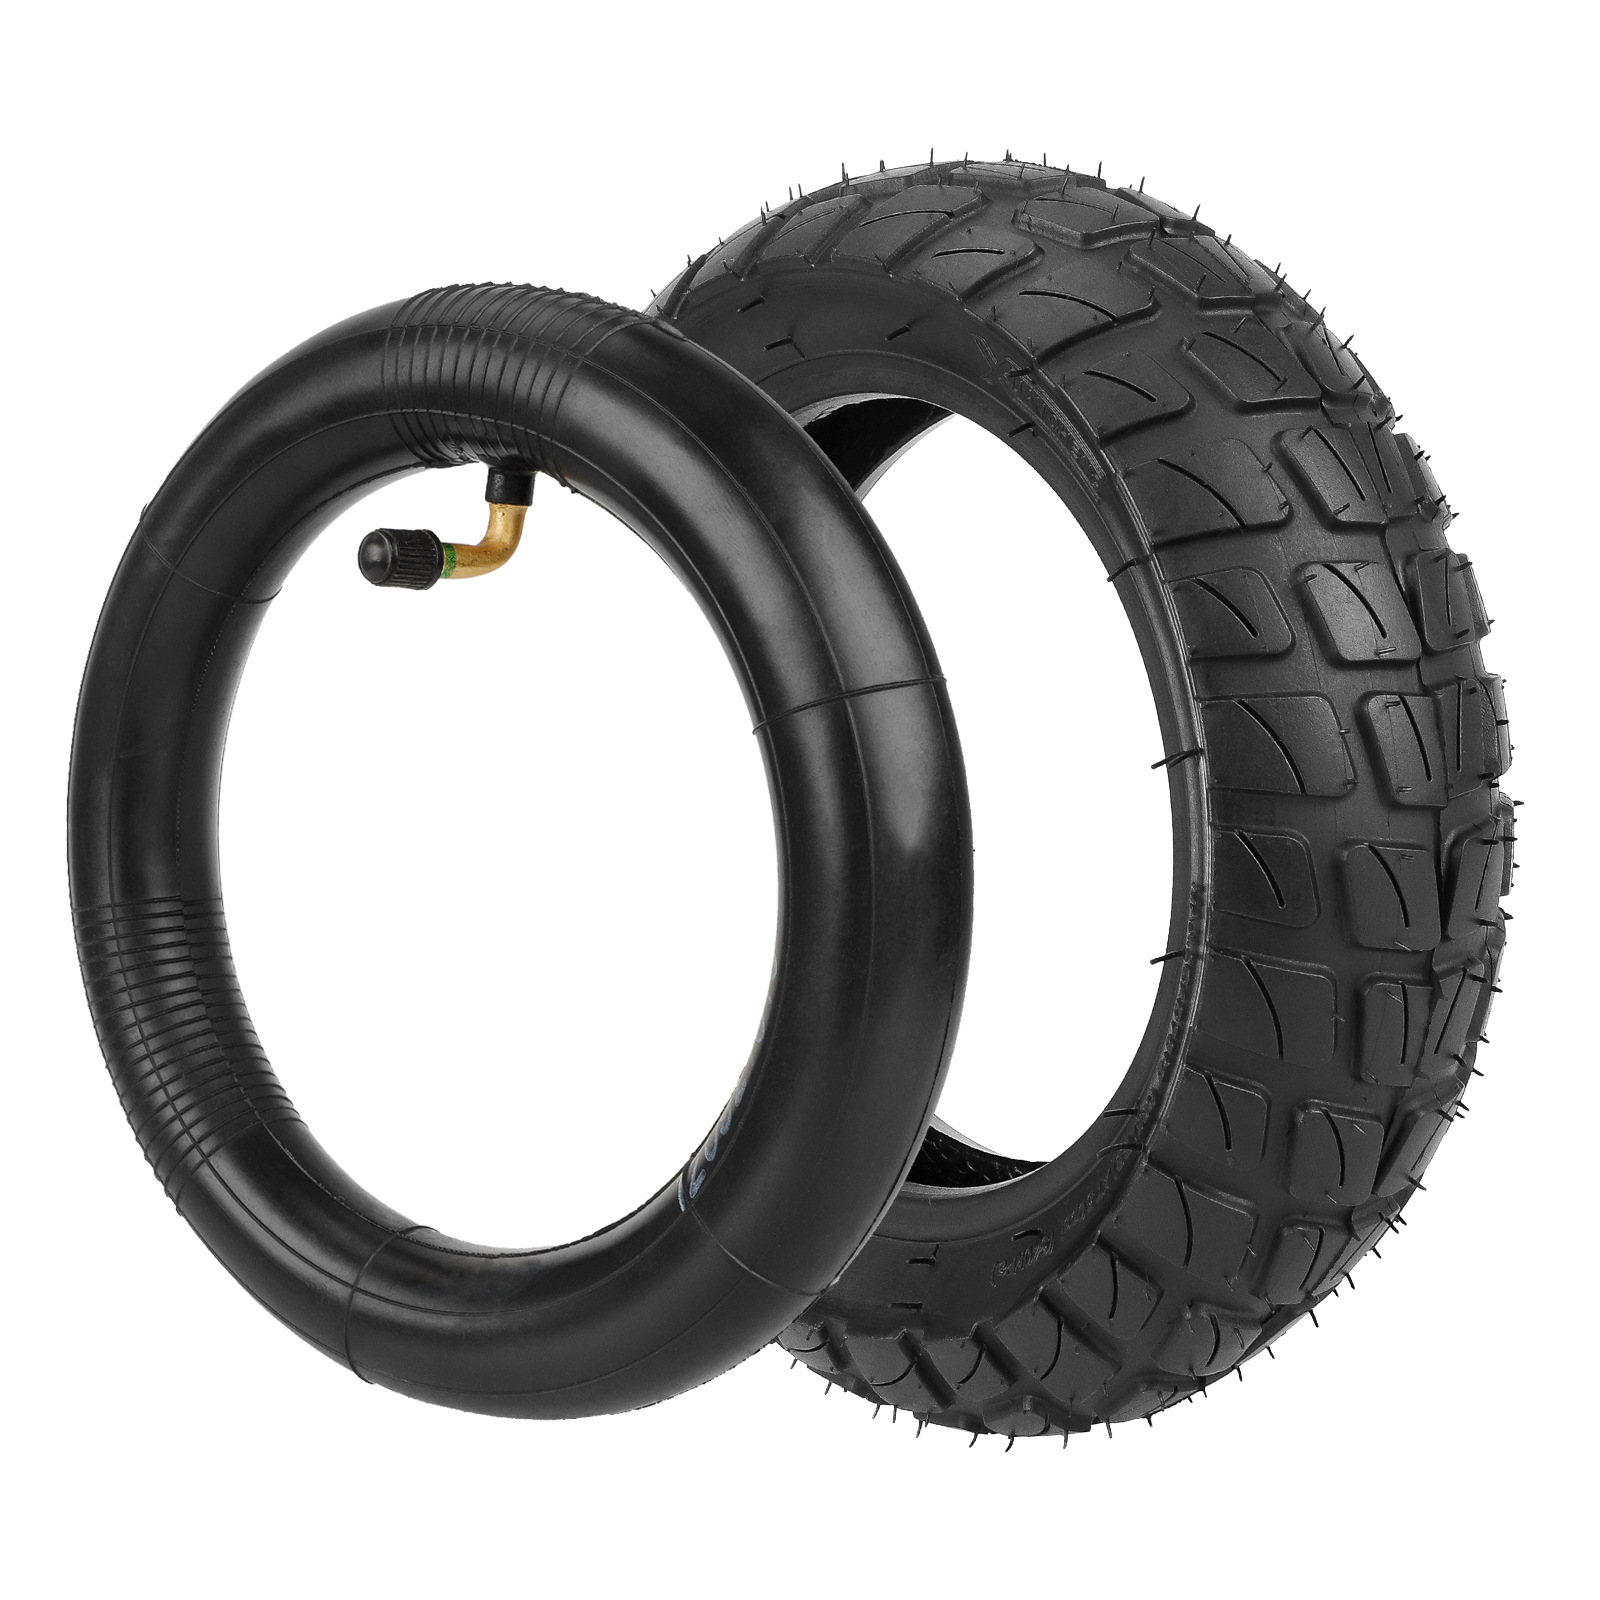 Ulip 8.5x2.0 Tubeless Tire High Quality For Electric Scooter Zero 9 8.5 Inch 8 1/2x2.0 Pneumatic Inner/Outer Tyre